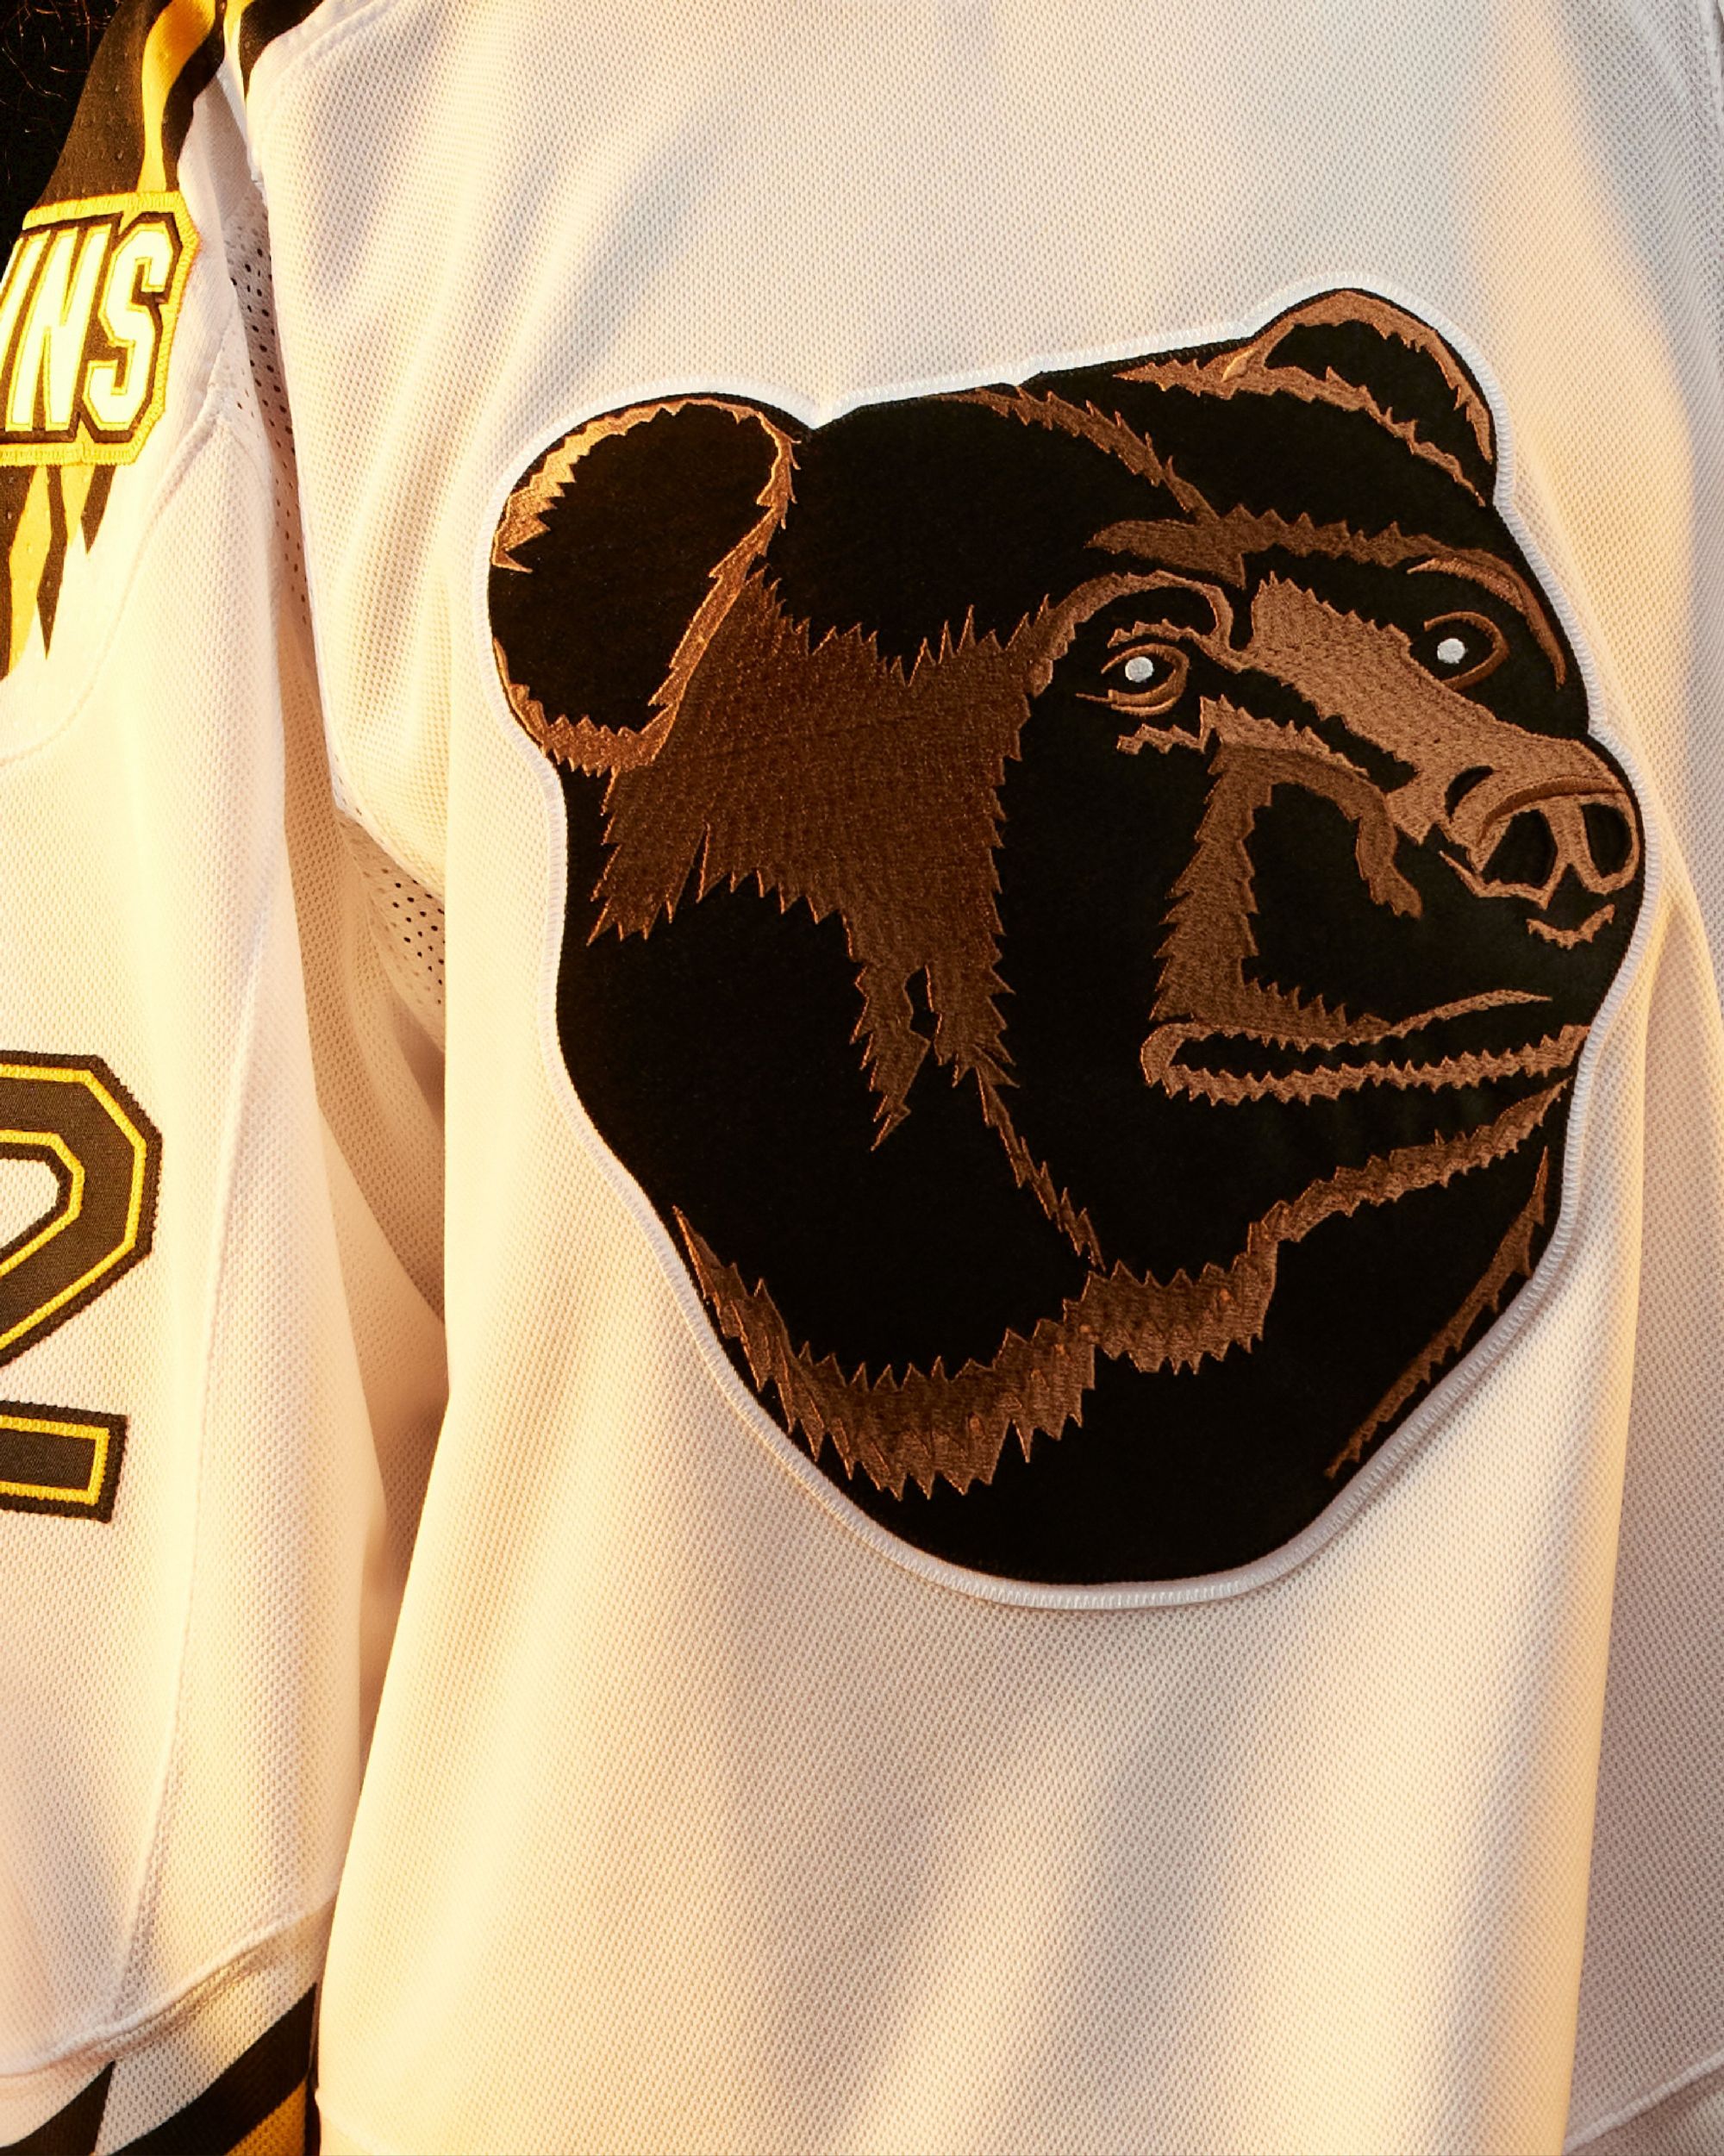 Jersey Question - Did they ever use this version of the meth bear patch? :  r/BostonBruins